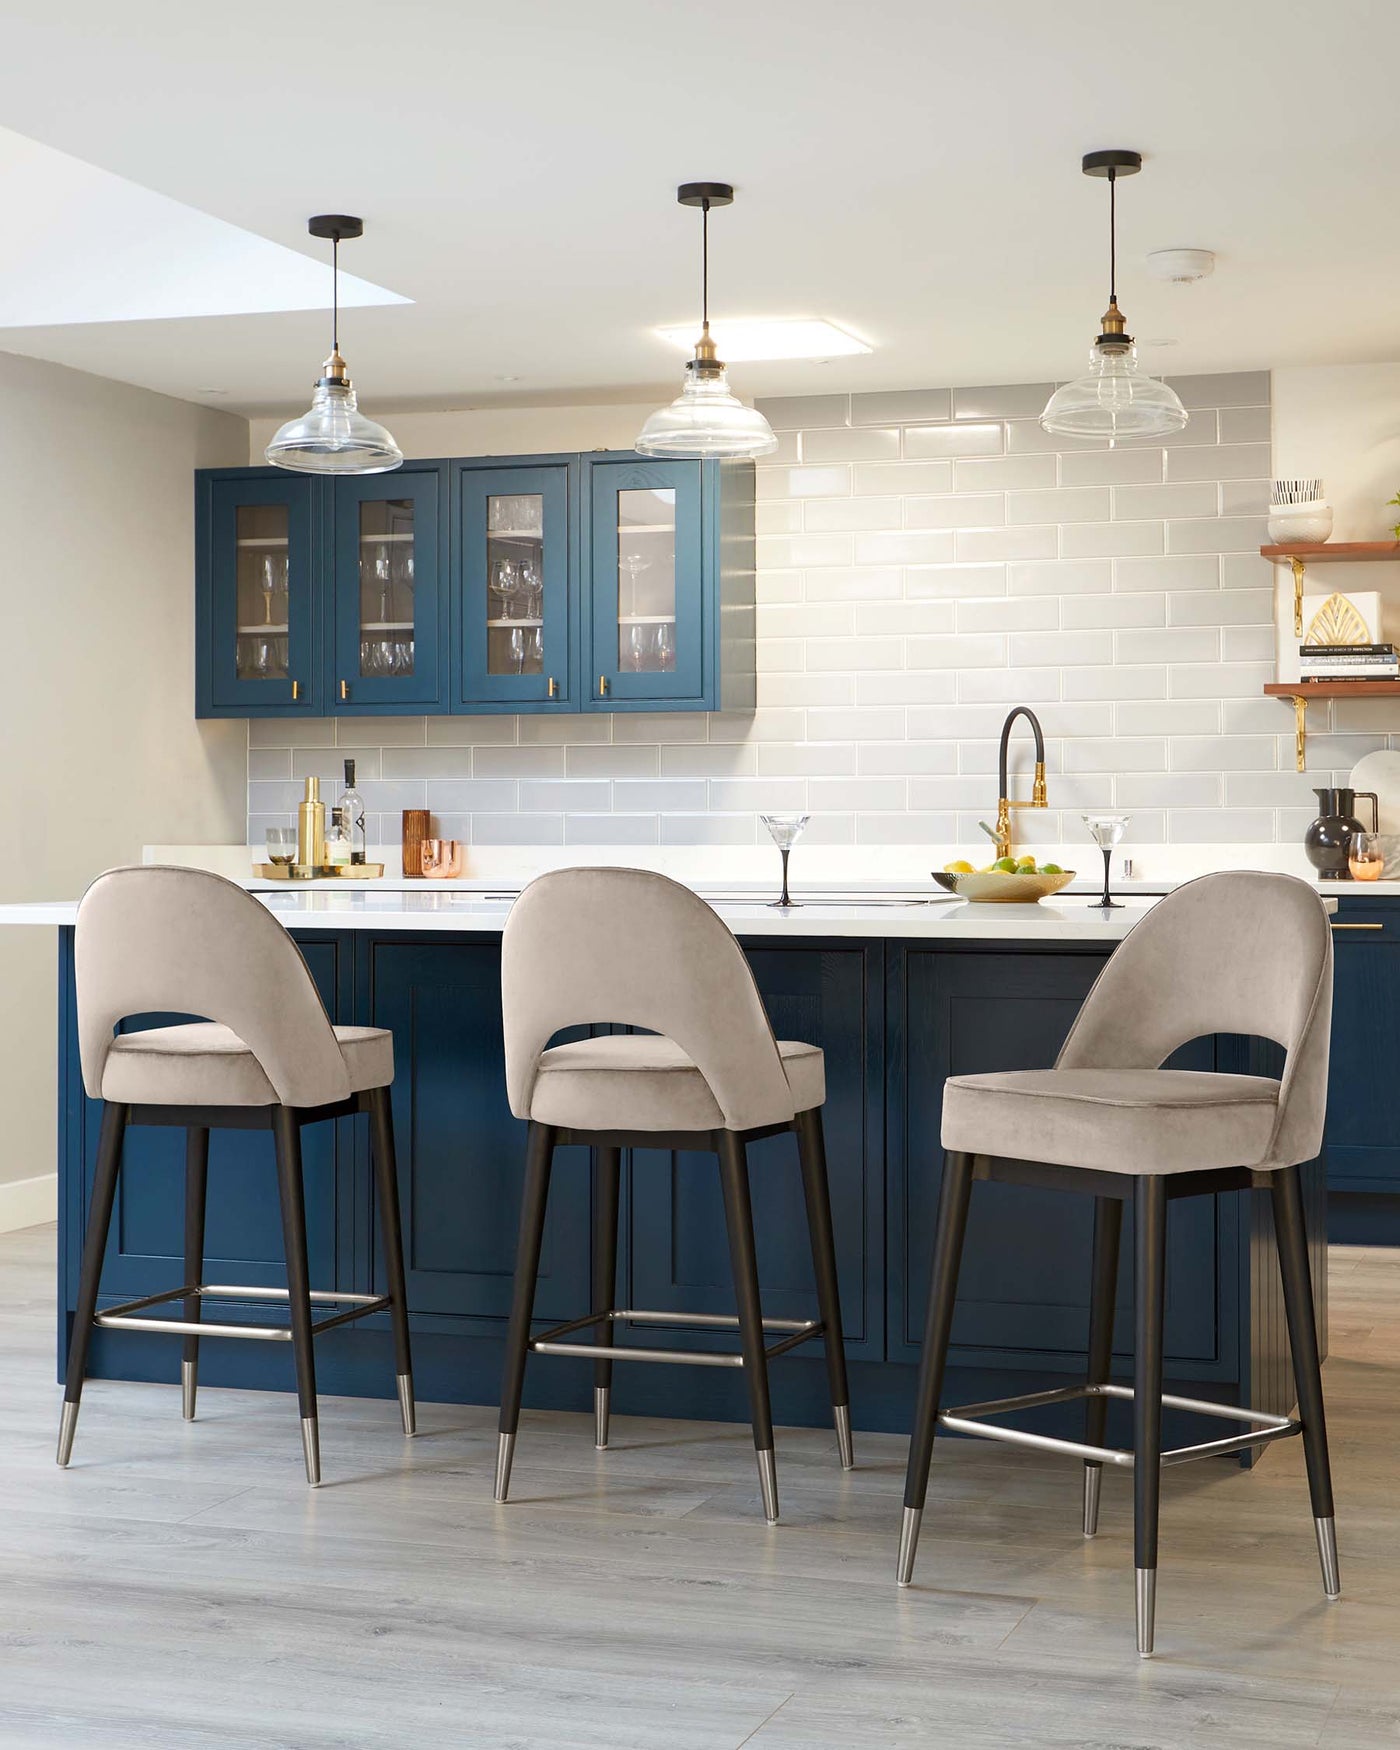 Three contemporary bar stools with grey upholstered seats and matte black metal legs are positioned at a kitchen island. The seats have curved backrests and integrated footrests on the legs for comfort. The kitchen island is dark blue with a white countertop.